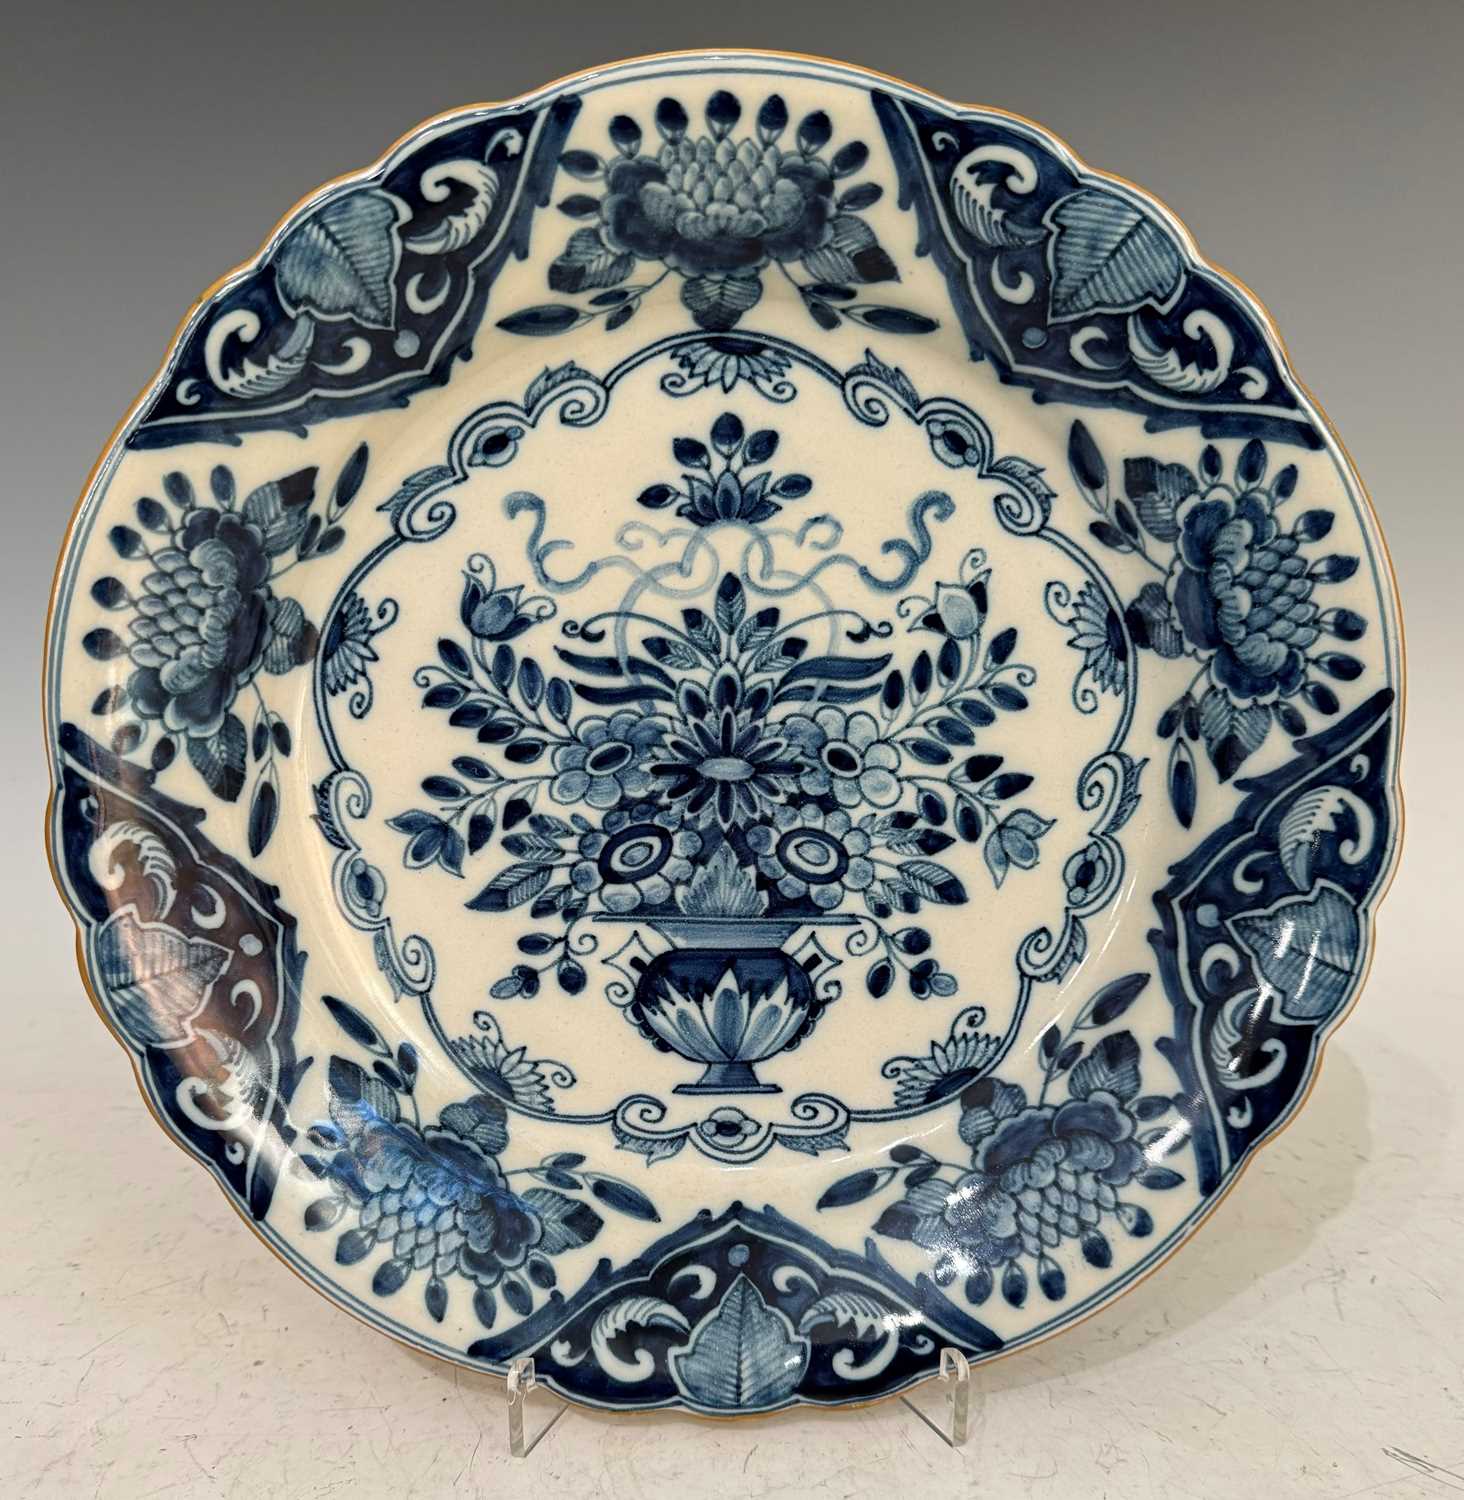 Delft floral pattern blue and white wall dish, with scalloped edge, the underside with Makkun